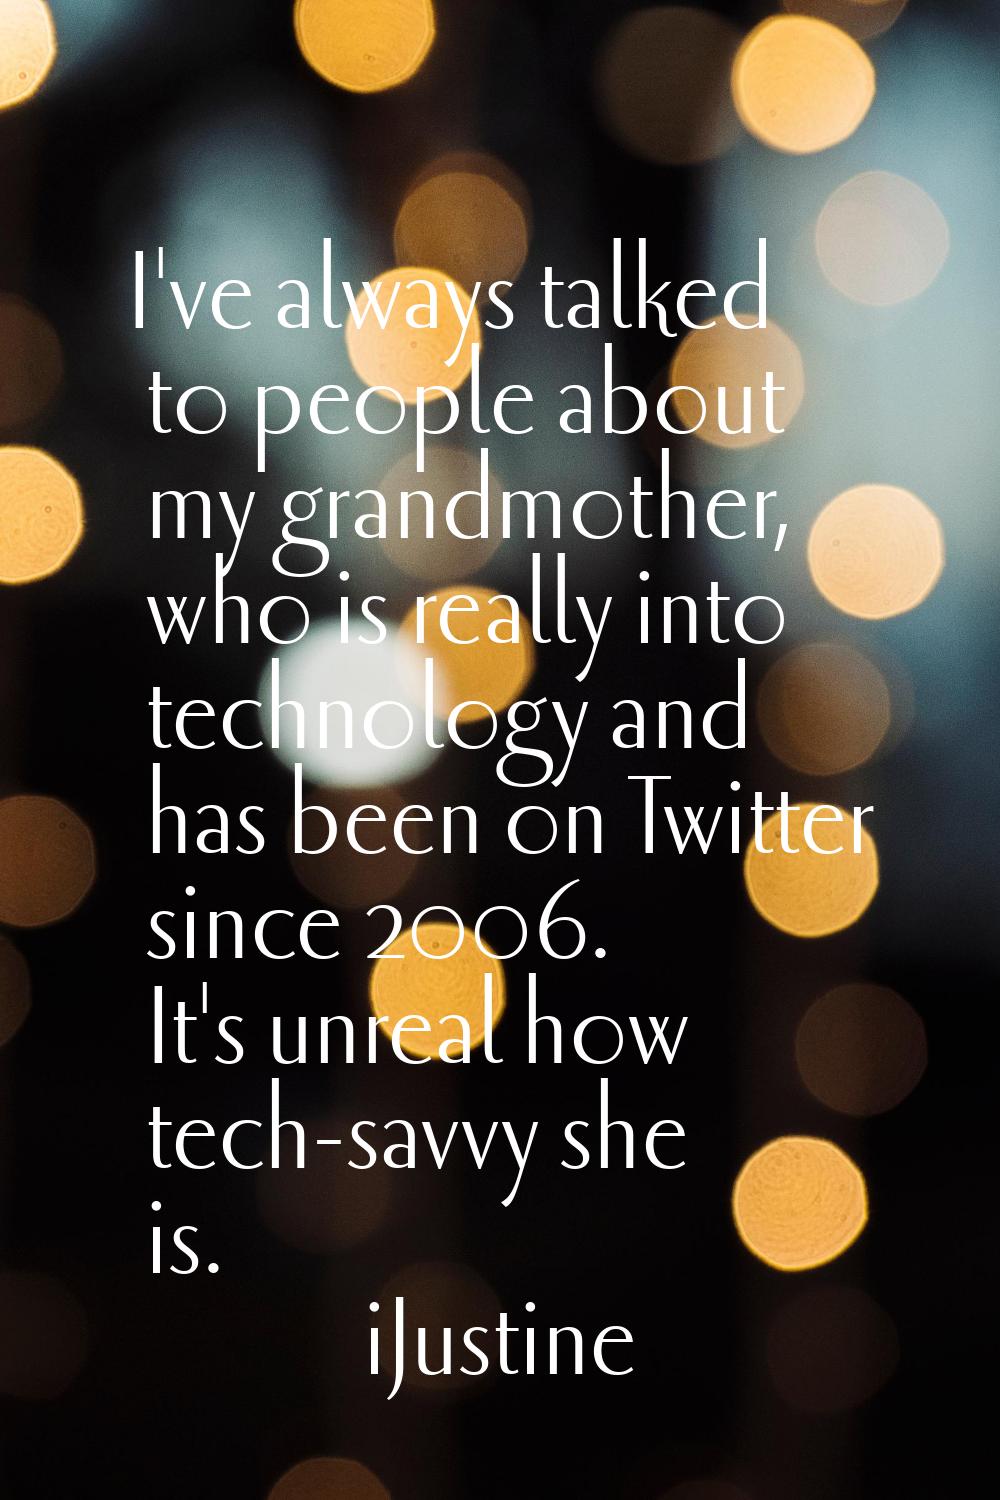 I've always talked to people about my grandmother, who is really into technology and has been on Tw